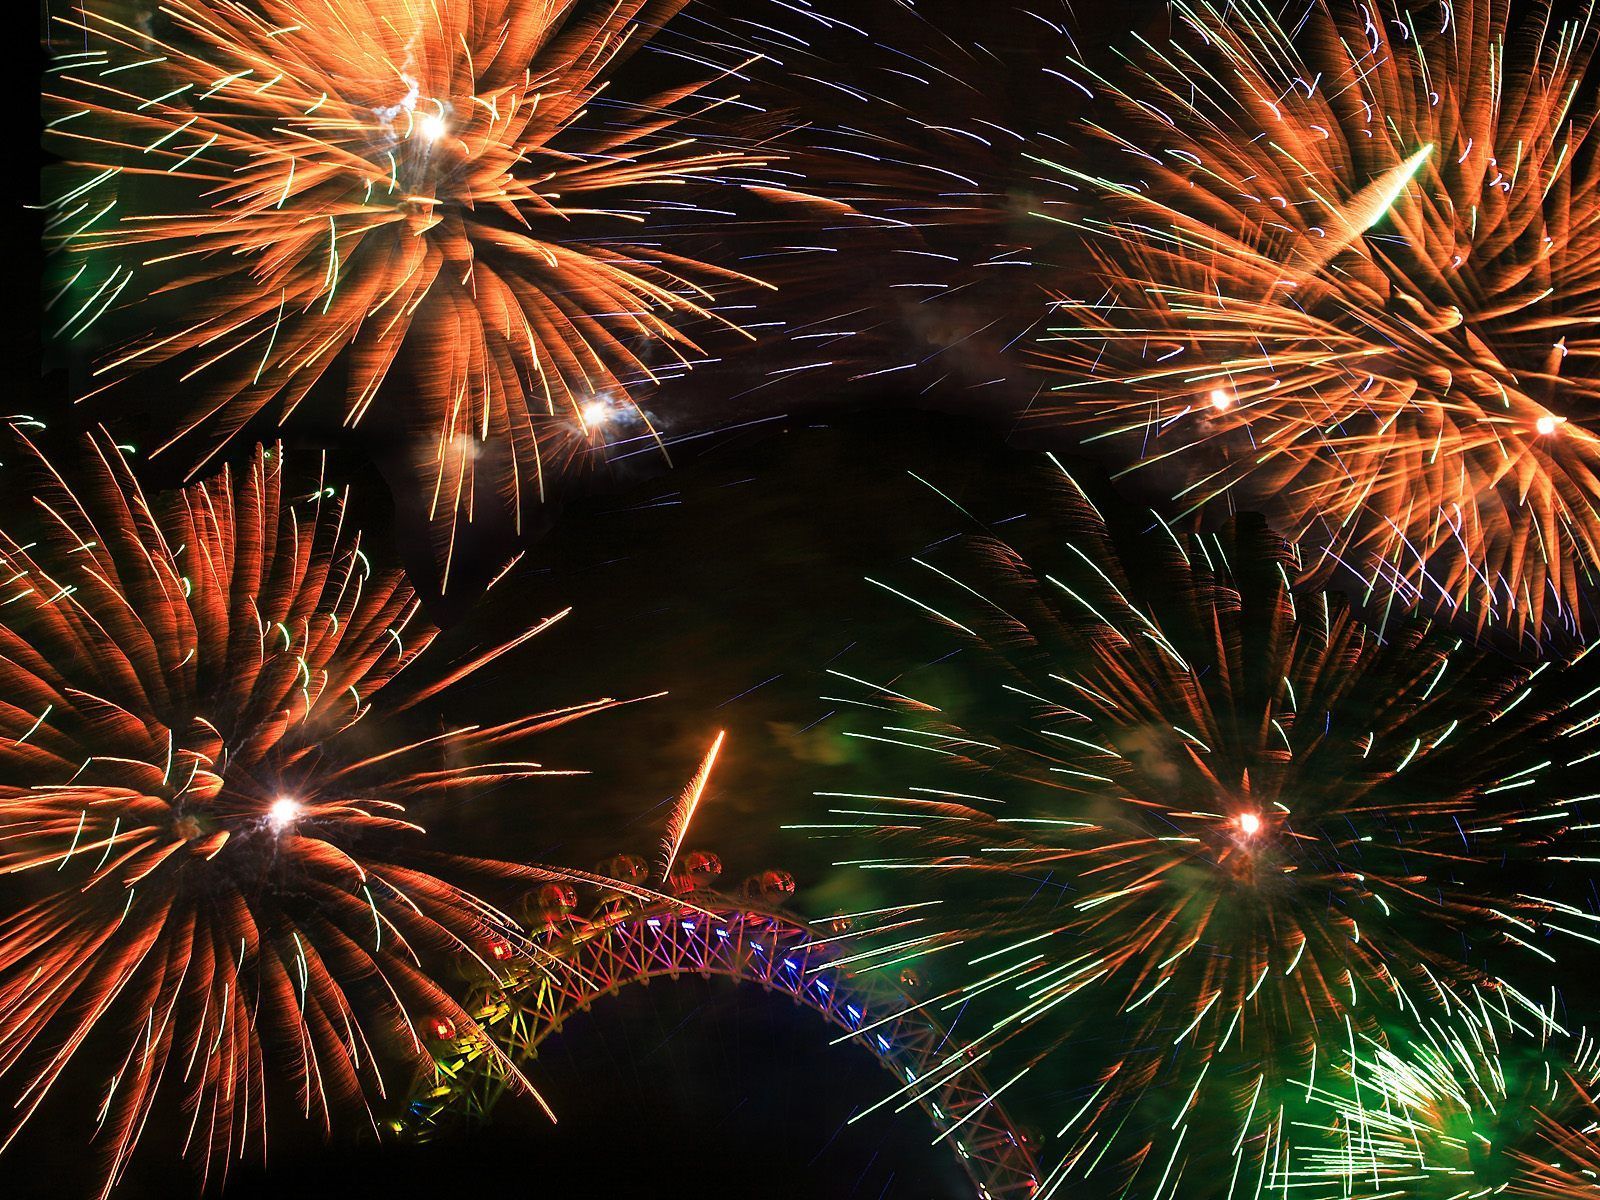 Fireworks light up the sky over the Sydney Harbour Bridge - New Year